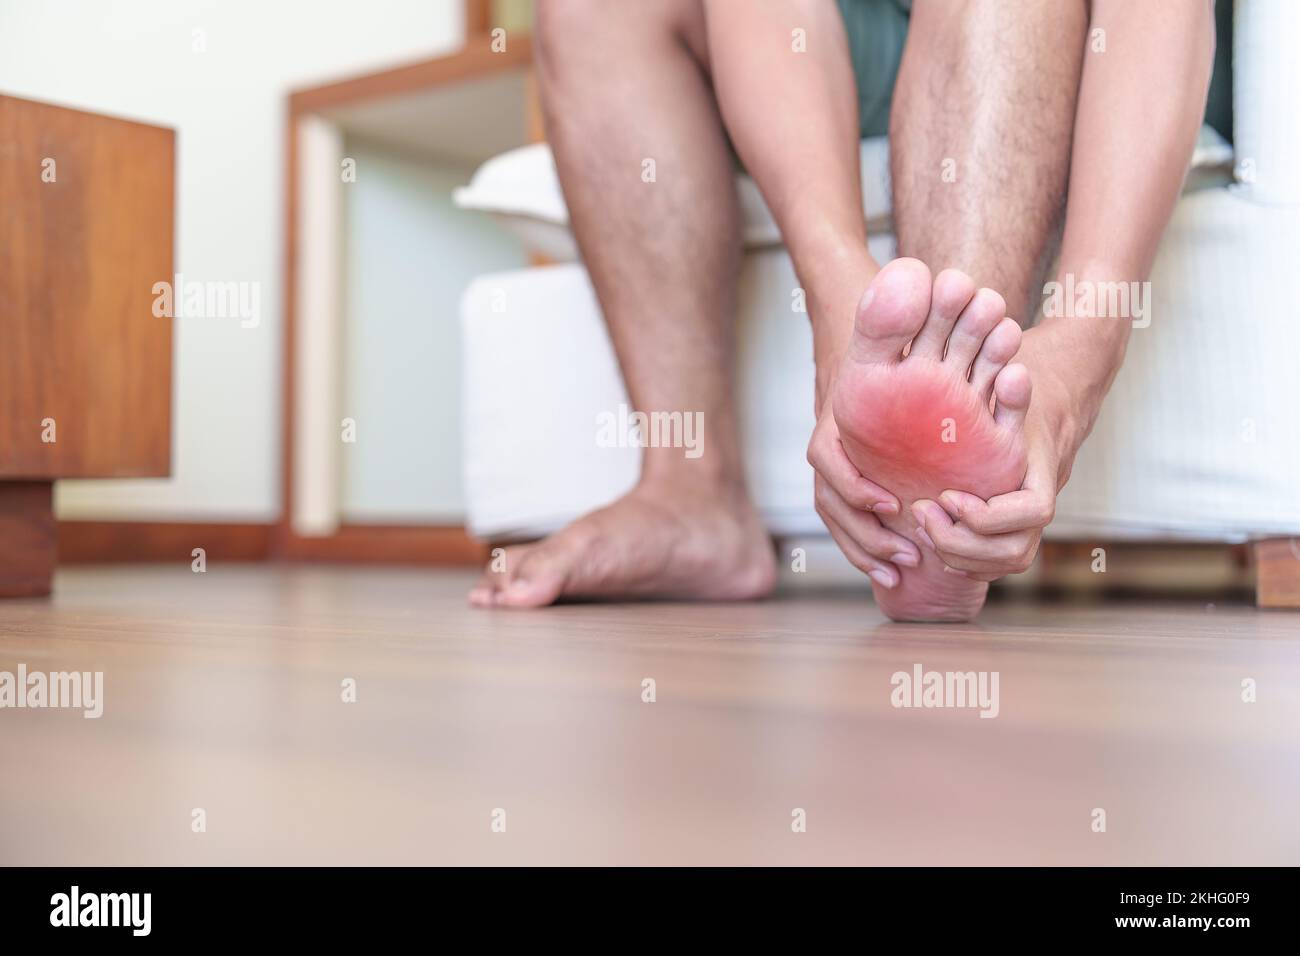 man having barefoot pain due to Plantar fasciitis and  bunion toes or blister due to wearing narrow shoes and waking or running longtime. Health and m Stock Photo